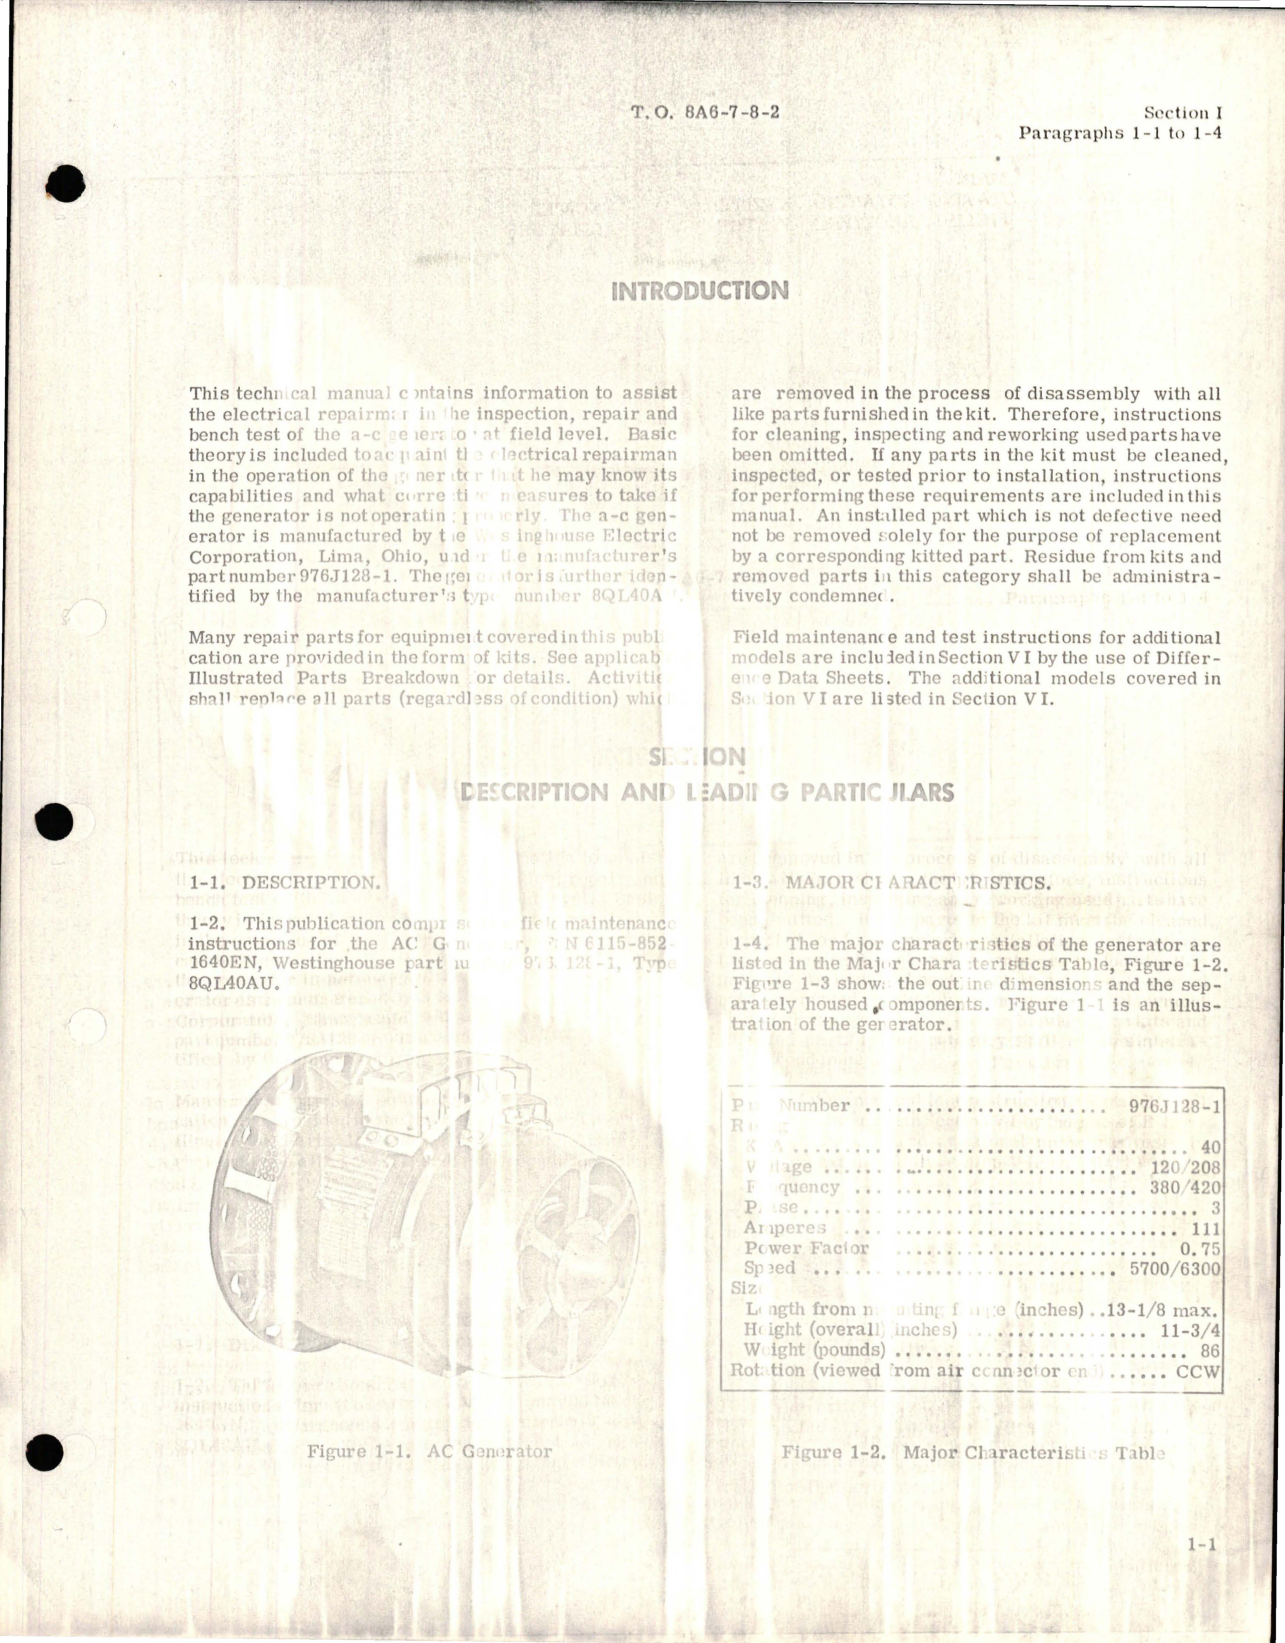 Sample page 5 from AirCorps Library document: Field Maintenance Instructions for A-C Generator - Parts 976J012-3, 976J119-7, 976J119-8, and 976J128-1 